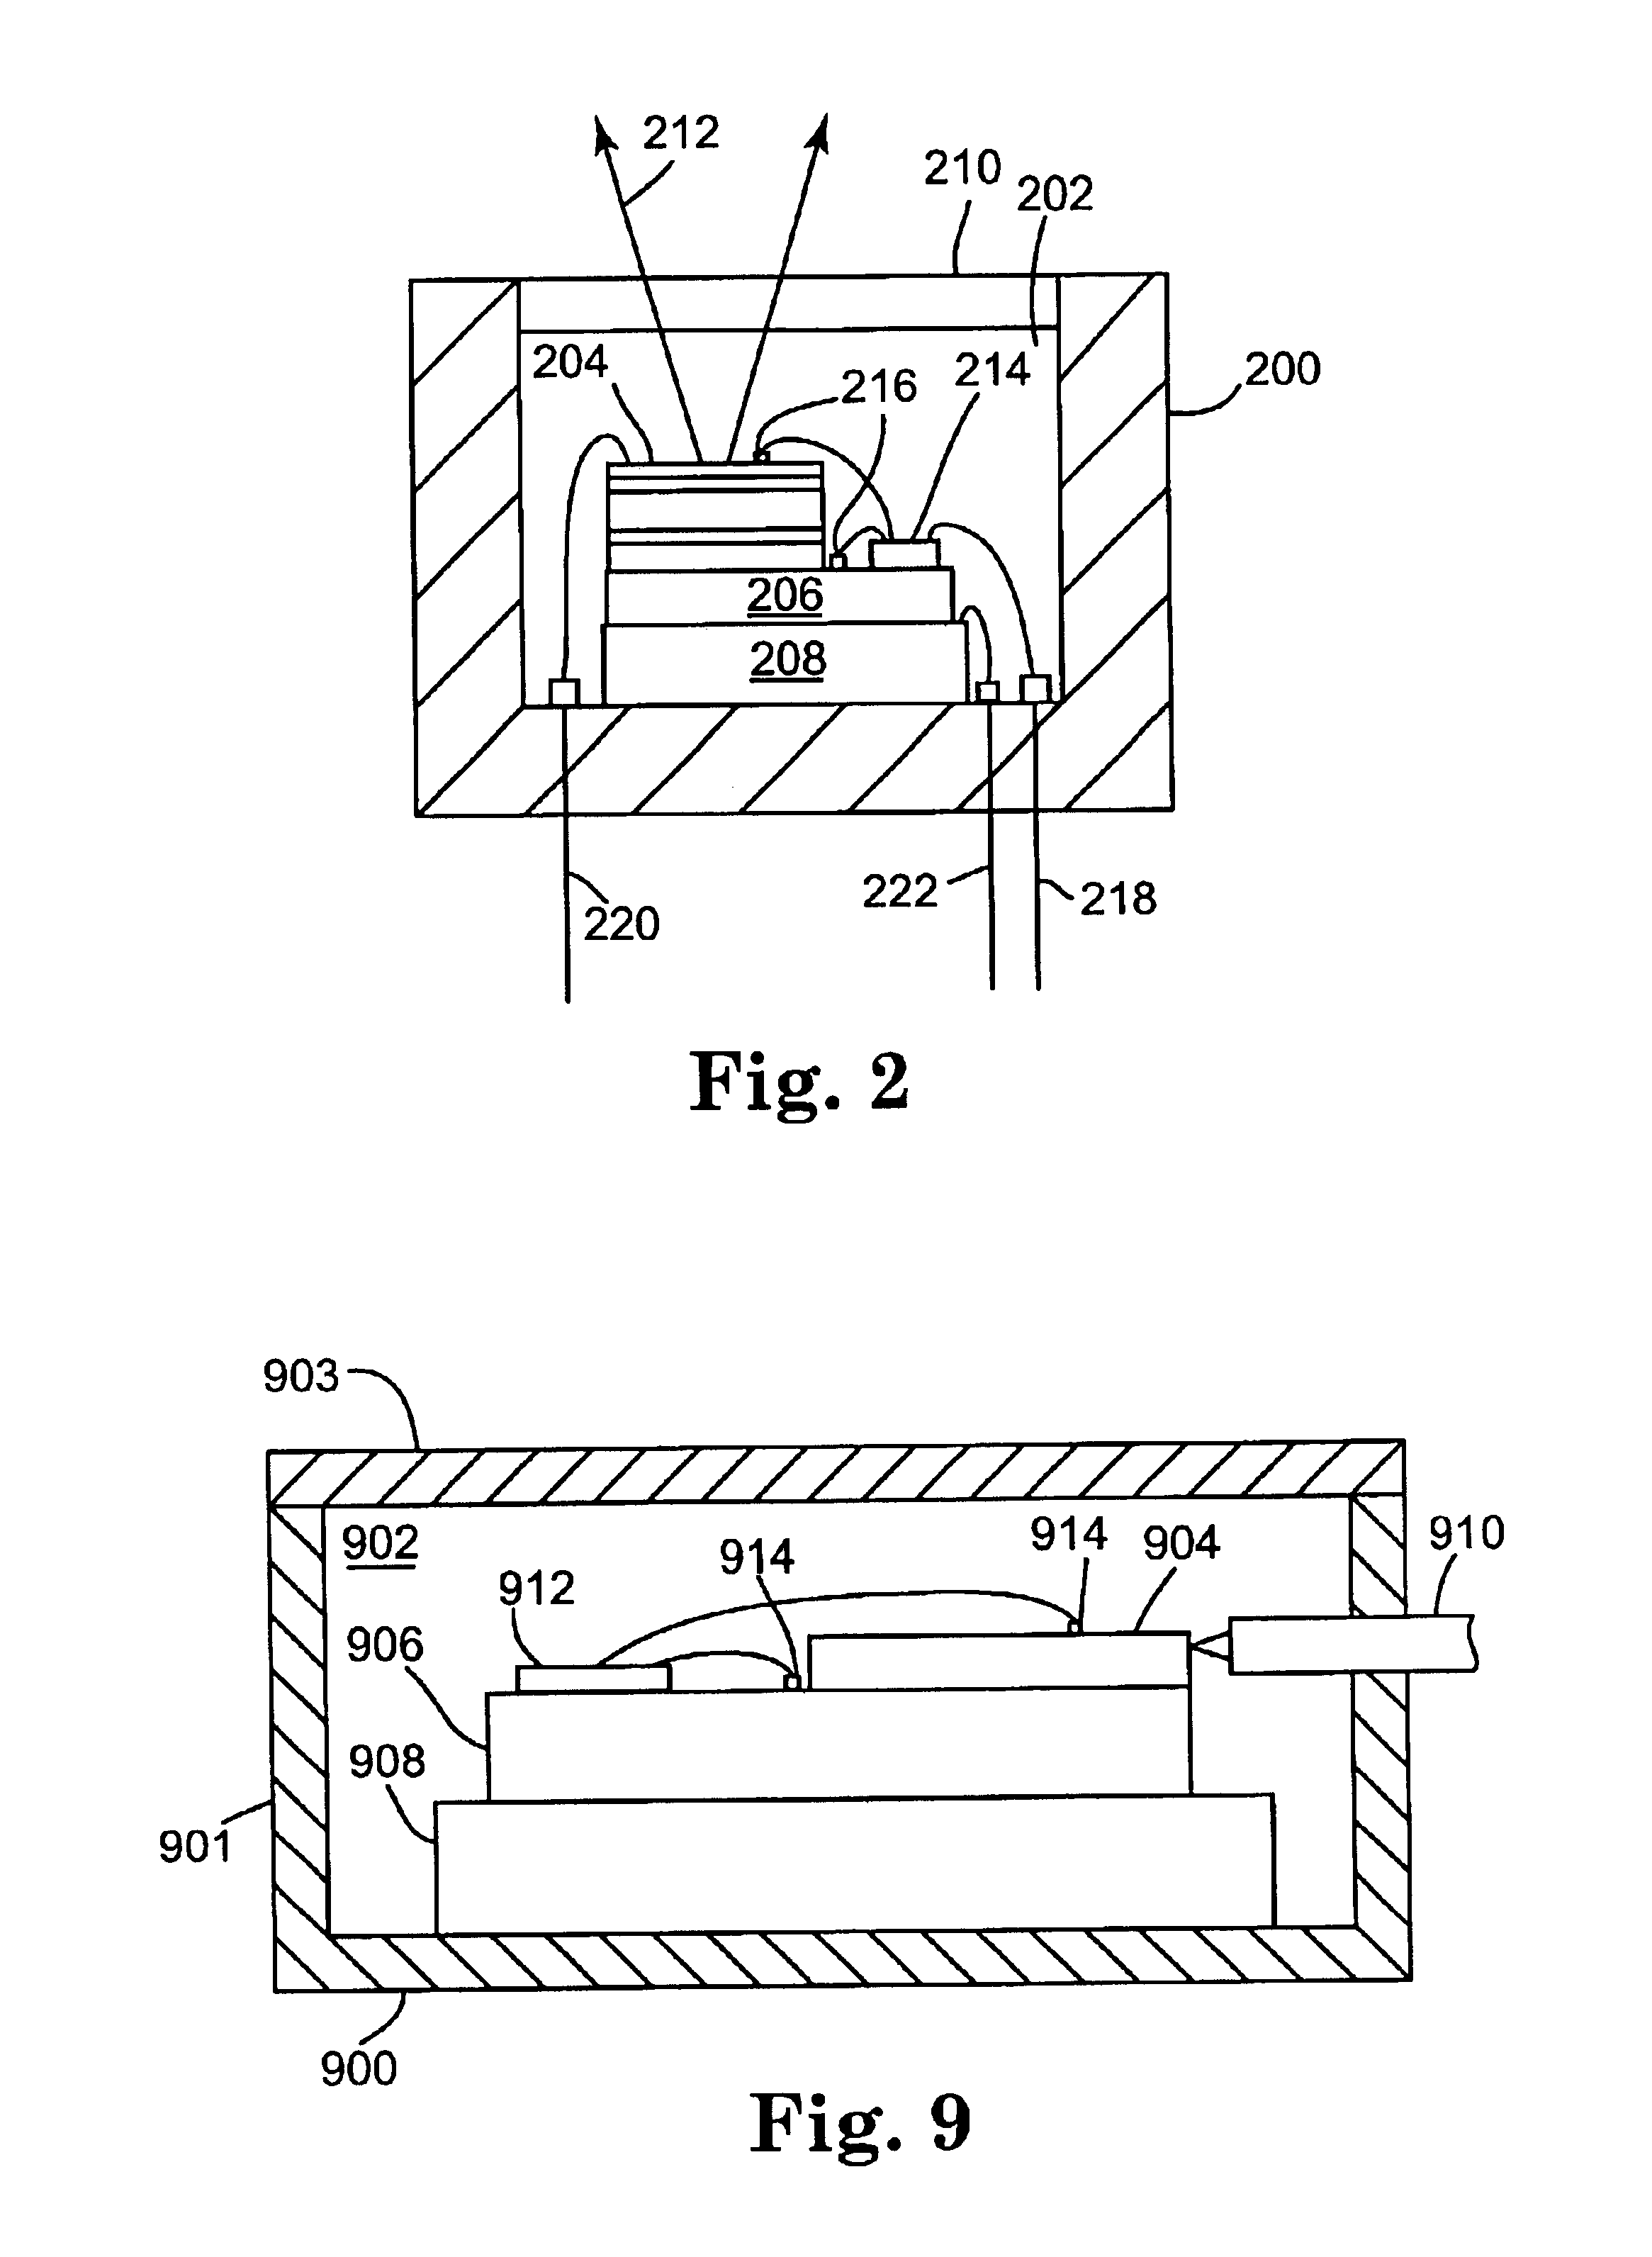 Control system for a semiconductor laser